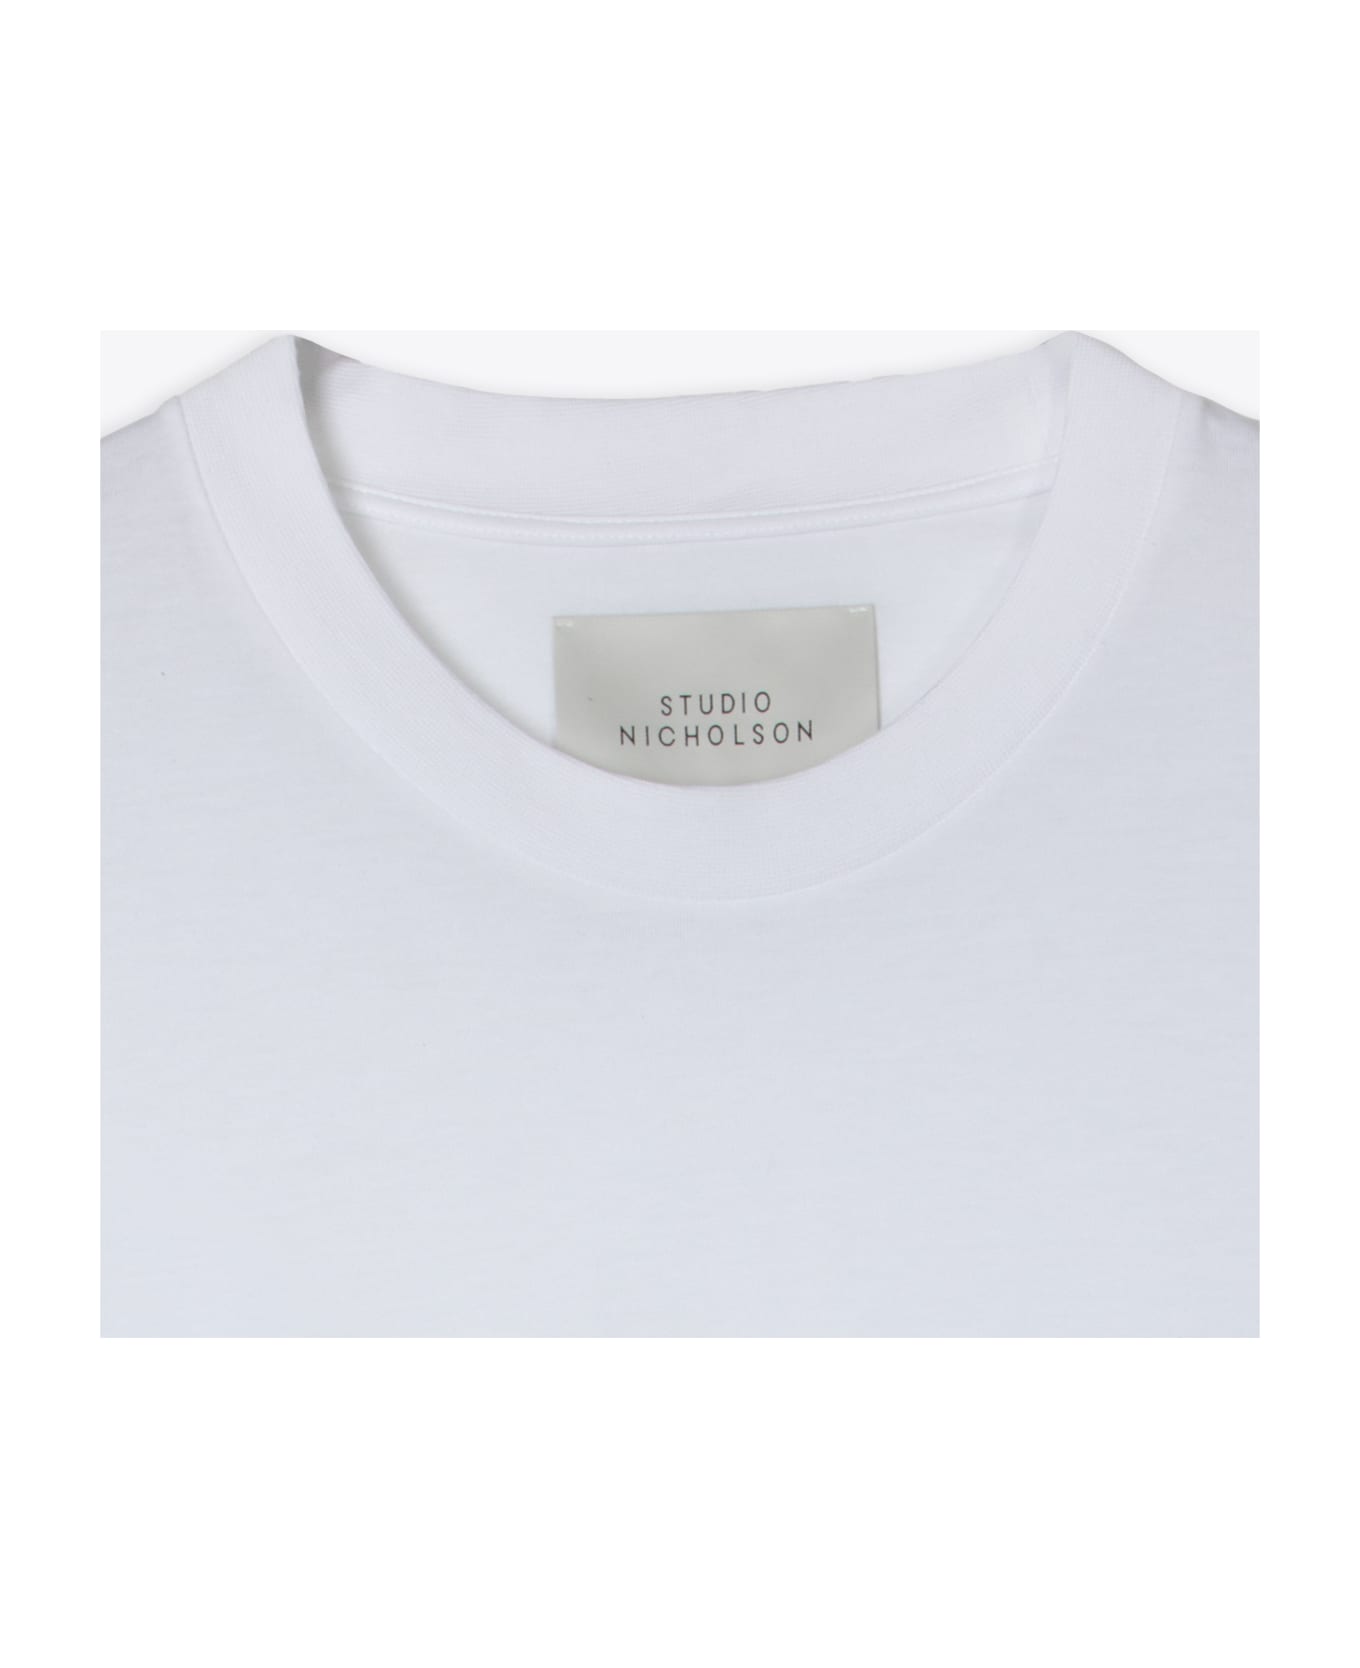 Studio Nicholson Jersey - Branded Easy Fit Ss T-shirt White relaxed fit t-shirt - Piu - Bianco